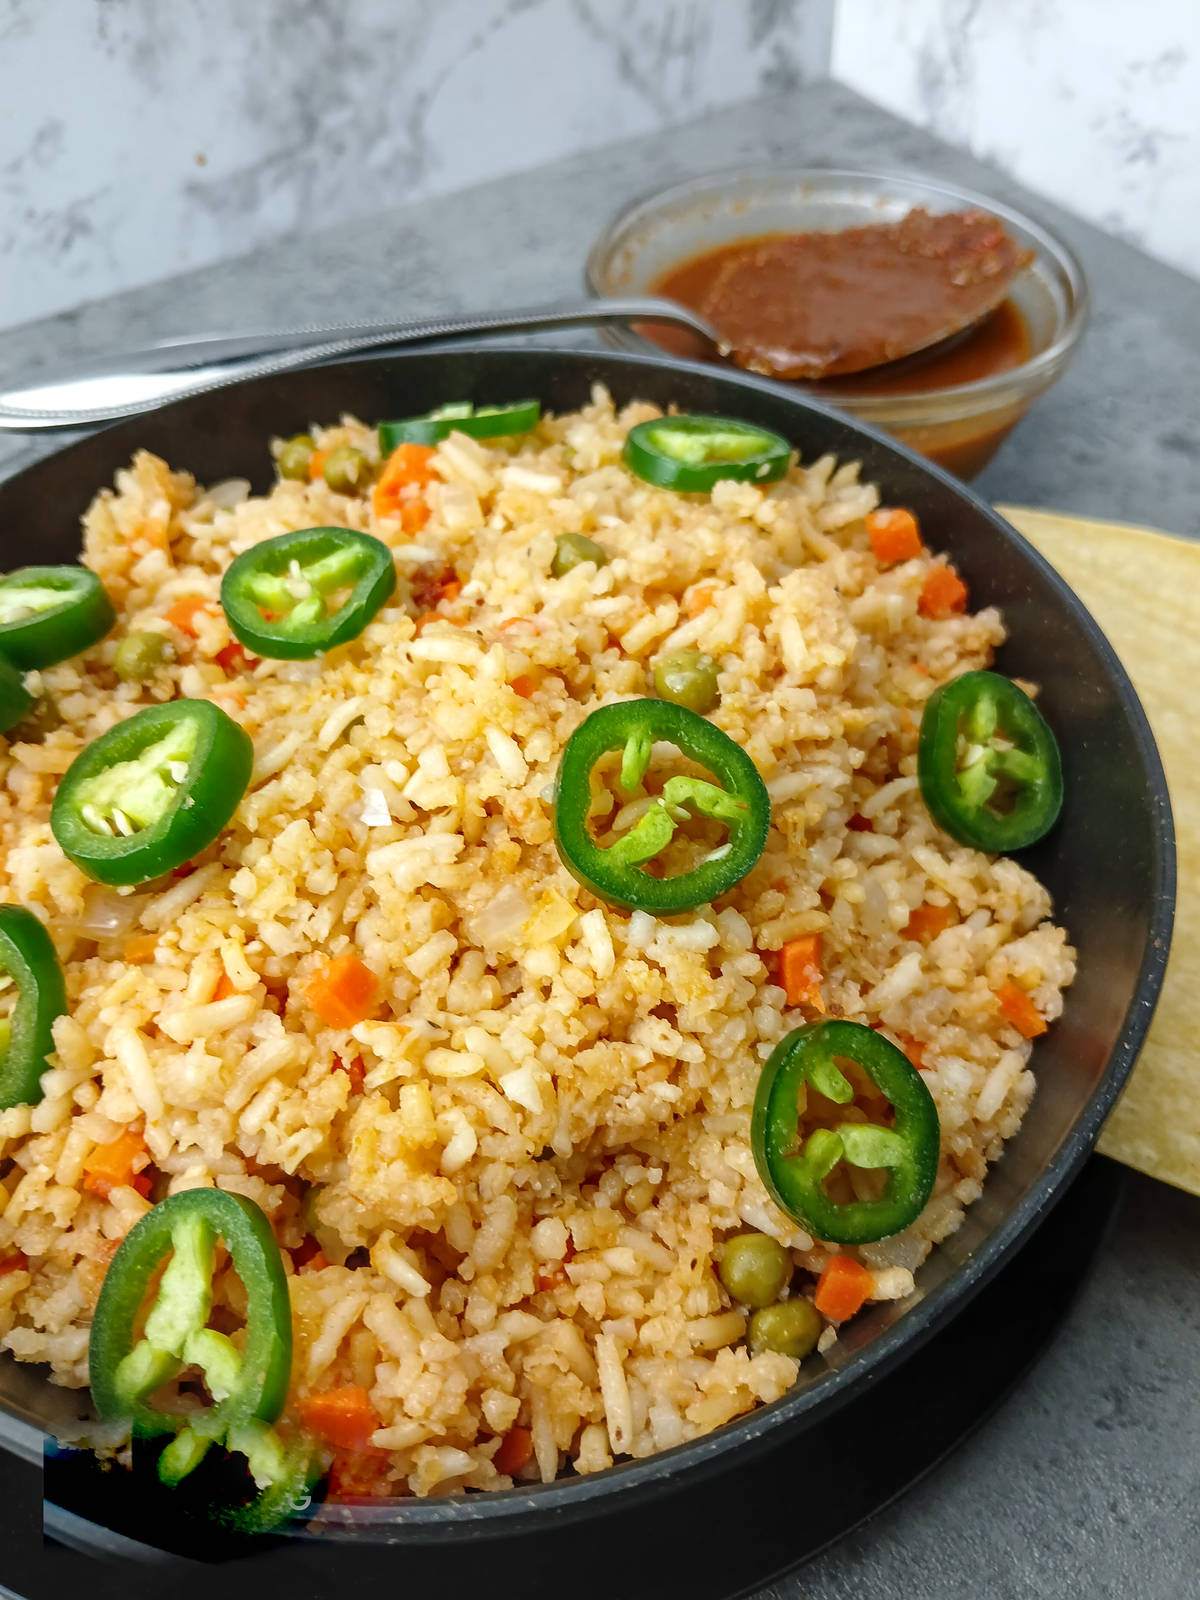 Low sodium Mexican rice with sauce and tortillas